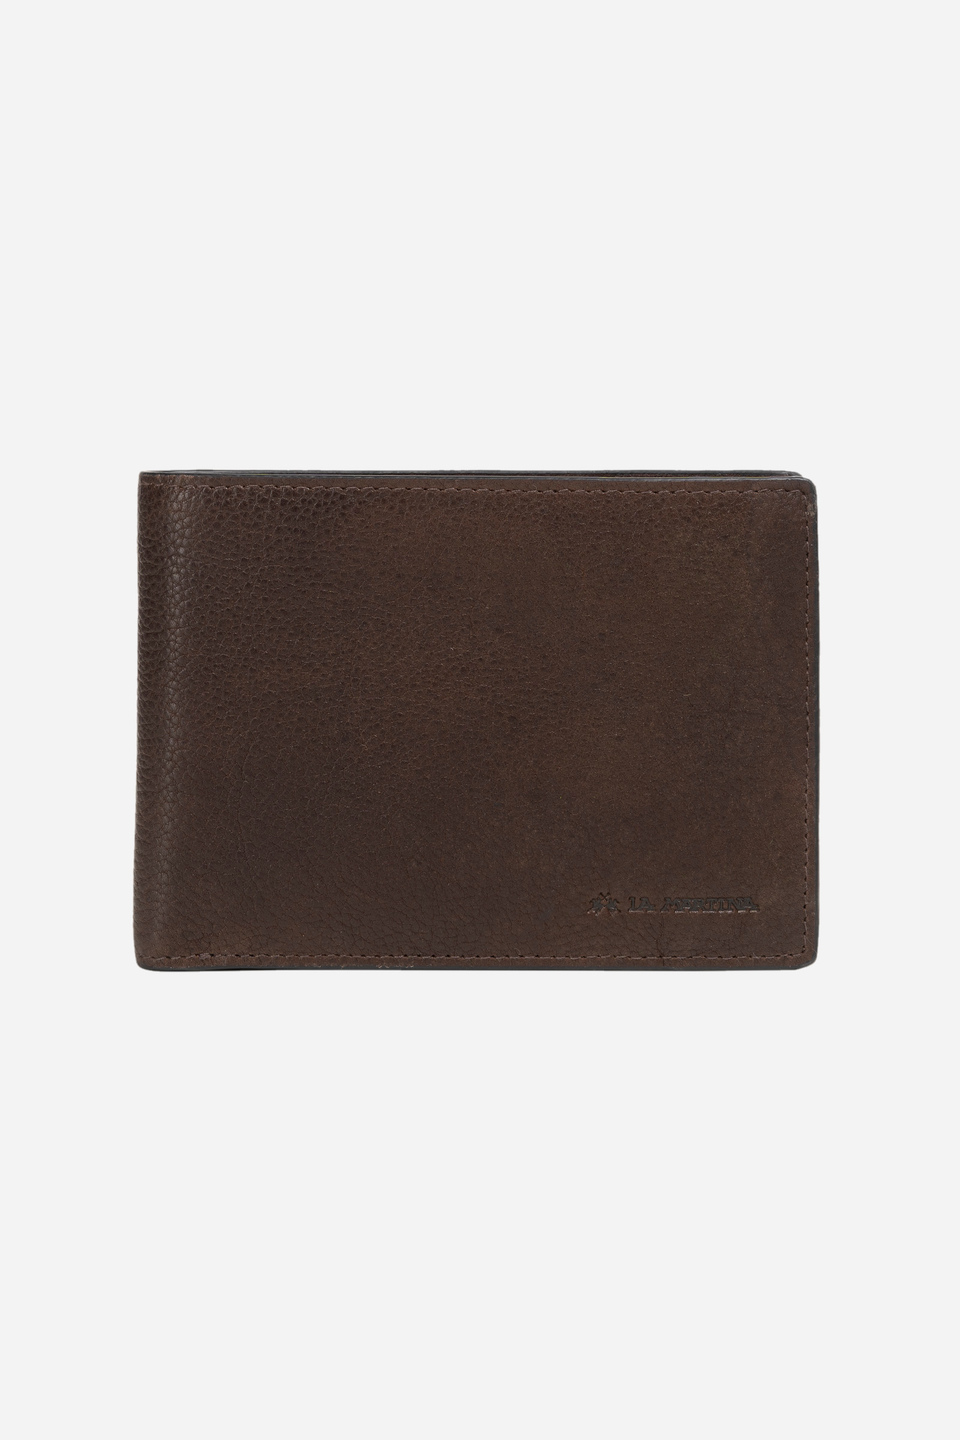 Buy Classic World Stylish Casual Leather wallet for men Online In India At  Discounted Prices